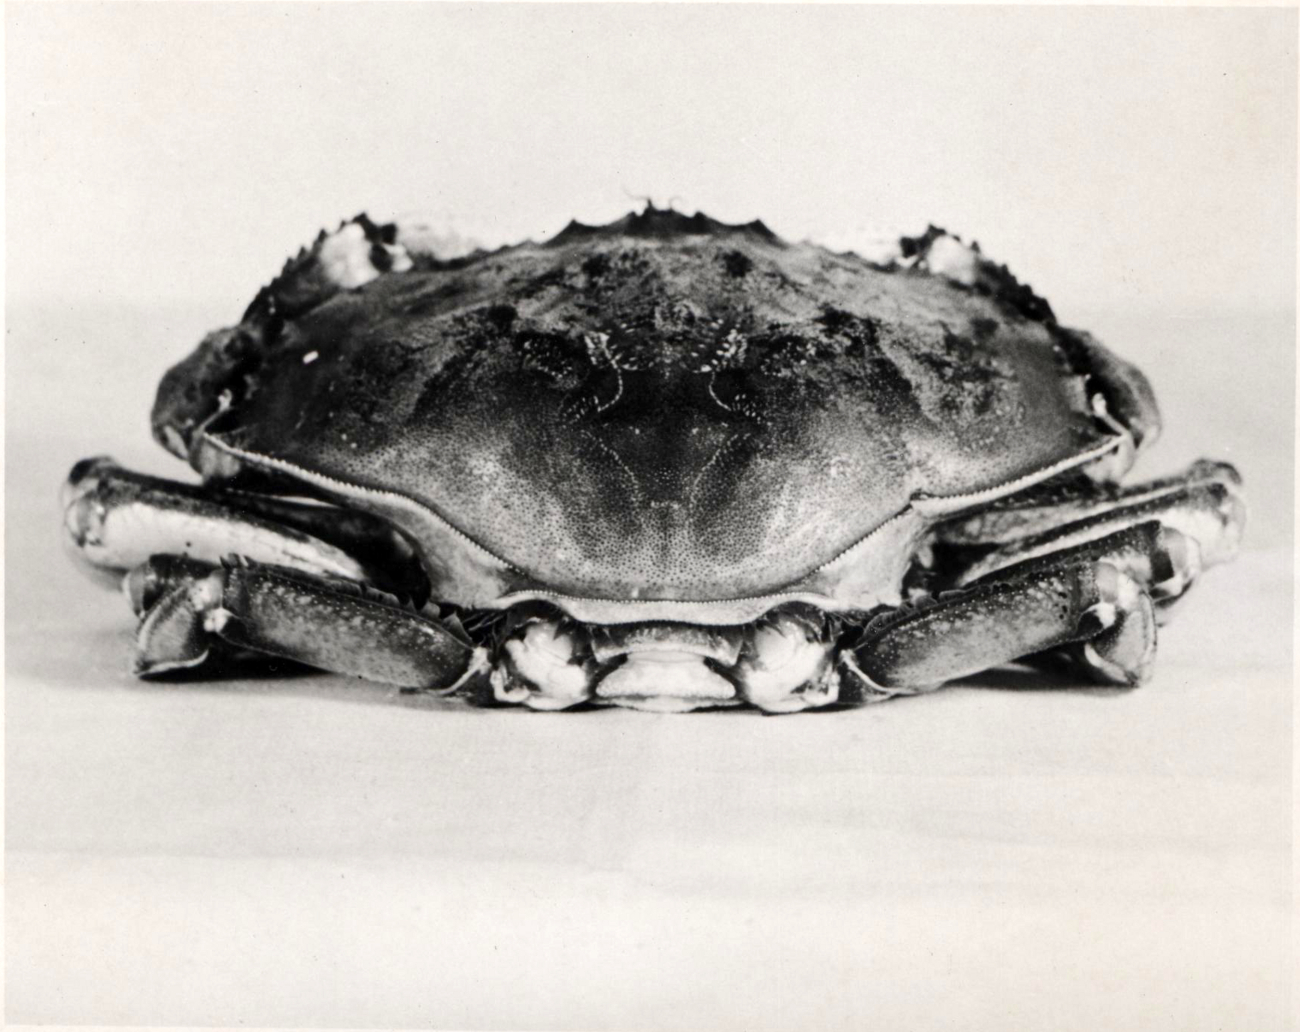 Large male dungeness crab